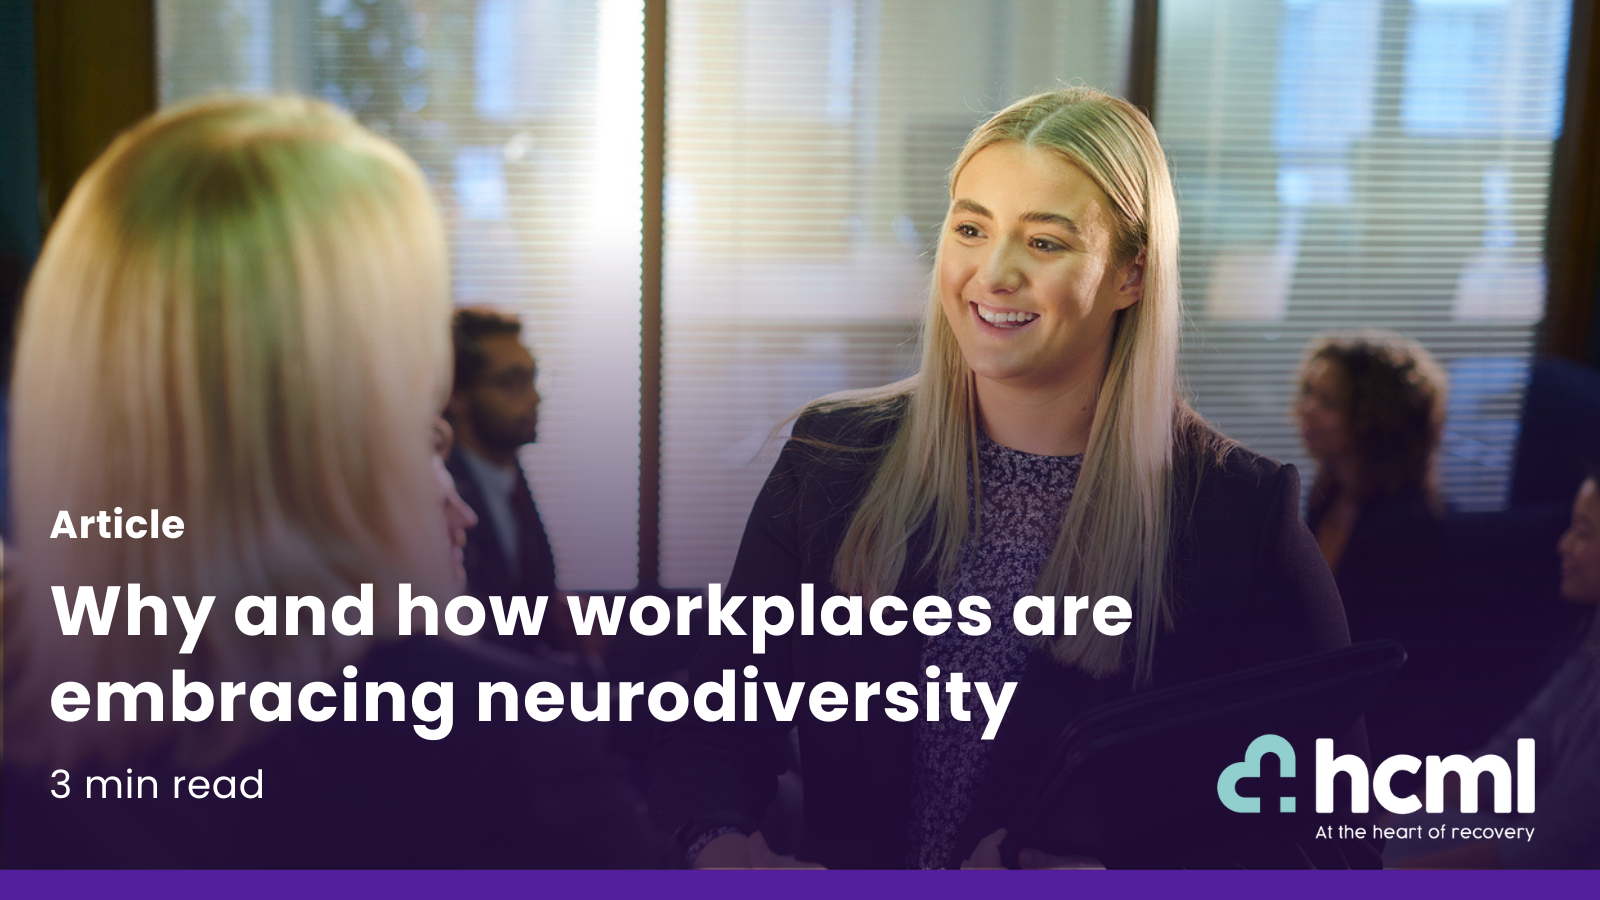 Why and how workplaces are embracing neurodiversity